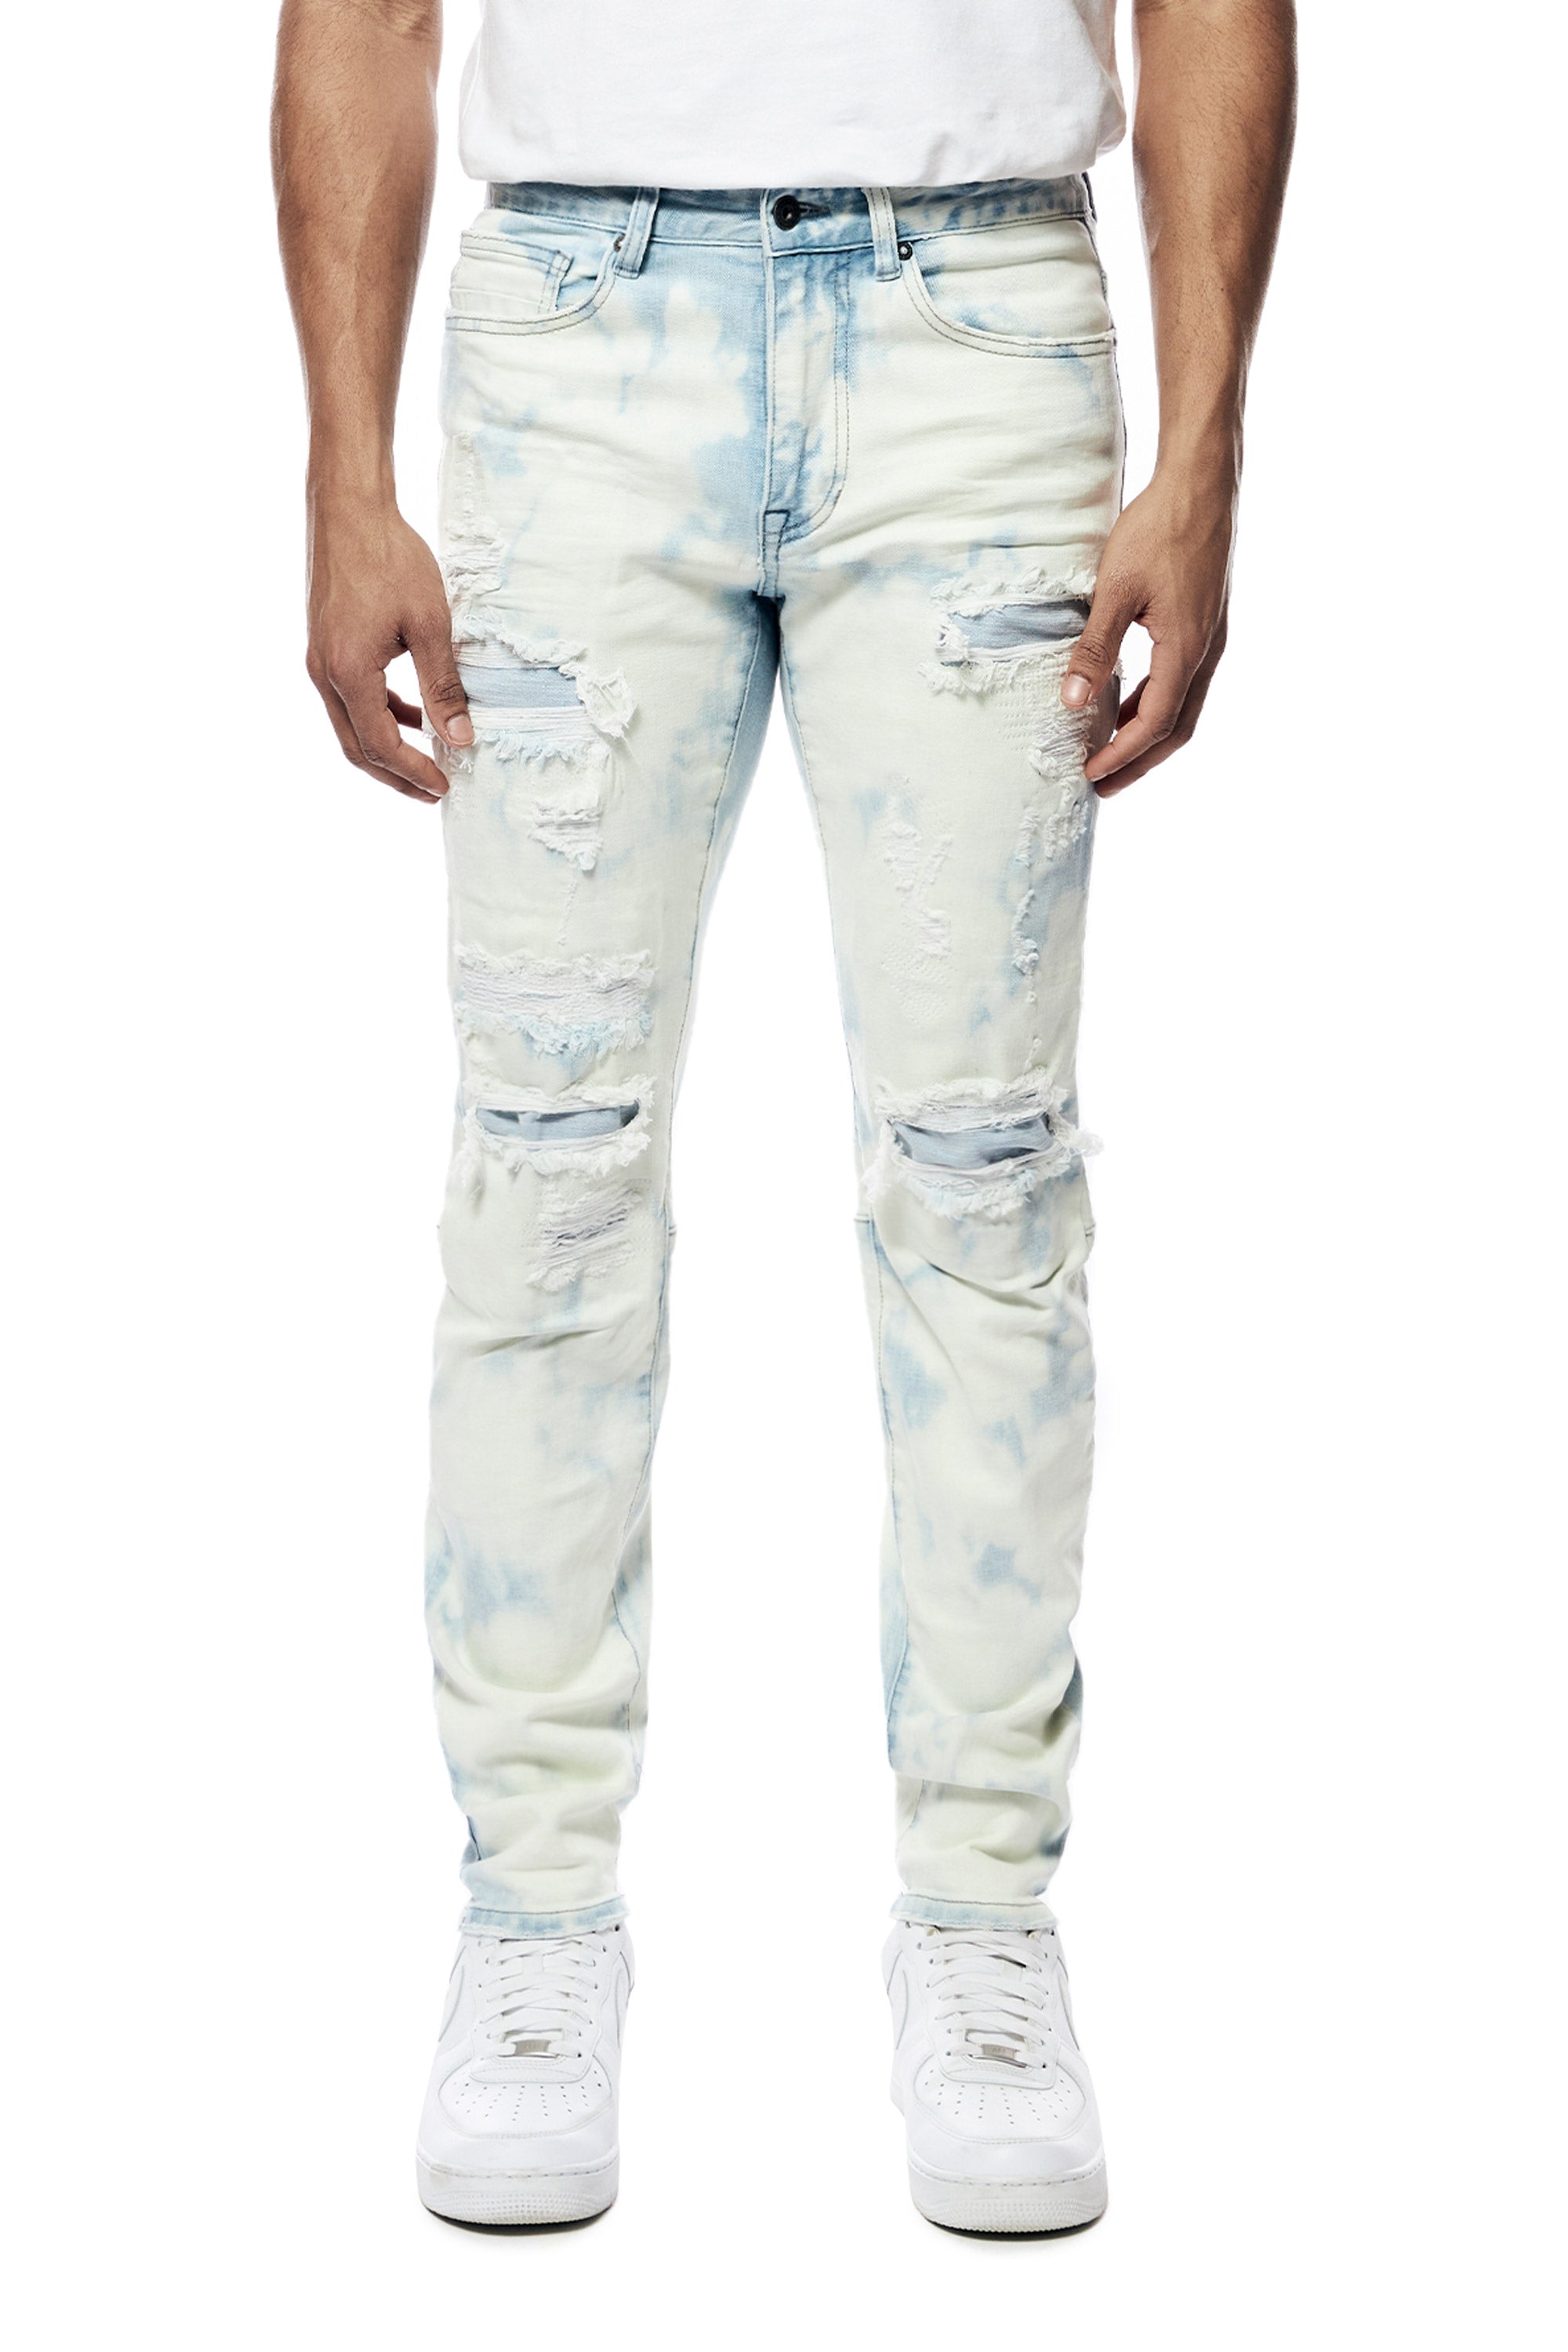 Bleach Washed Rip & Repaired Jeans - Billie Blue